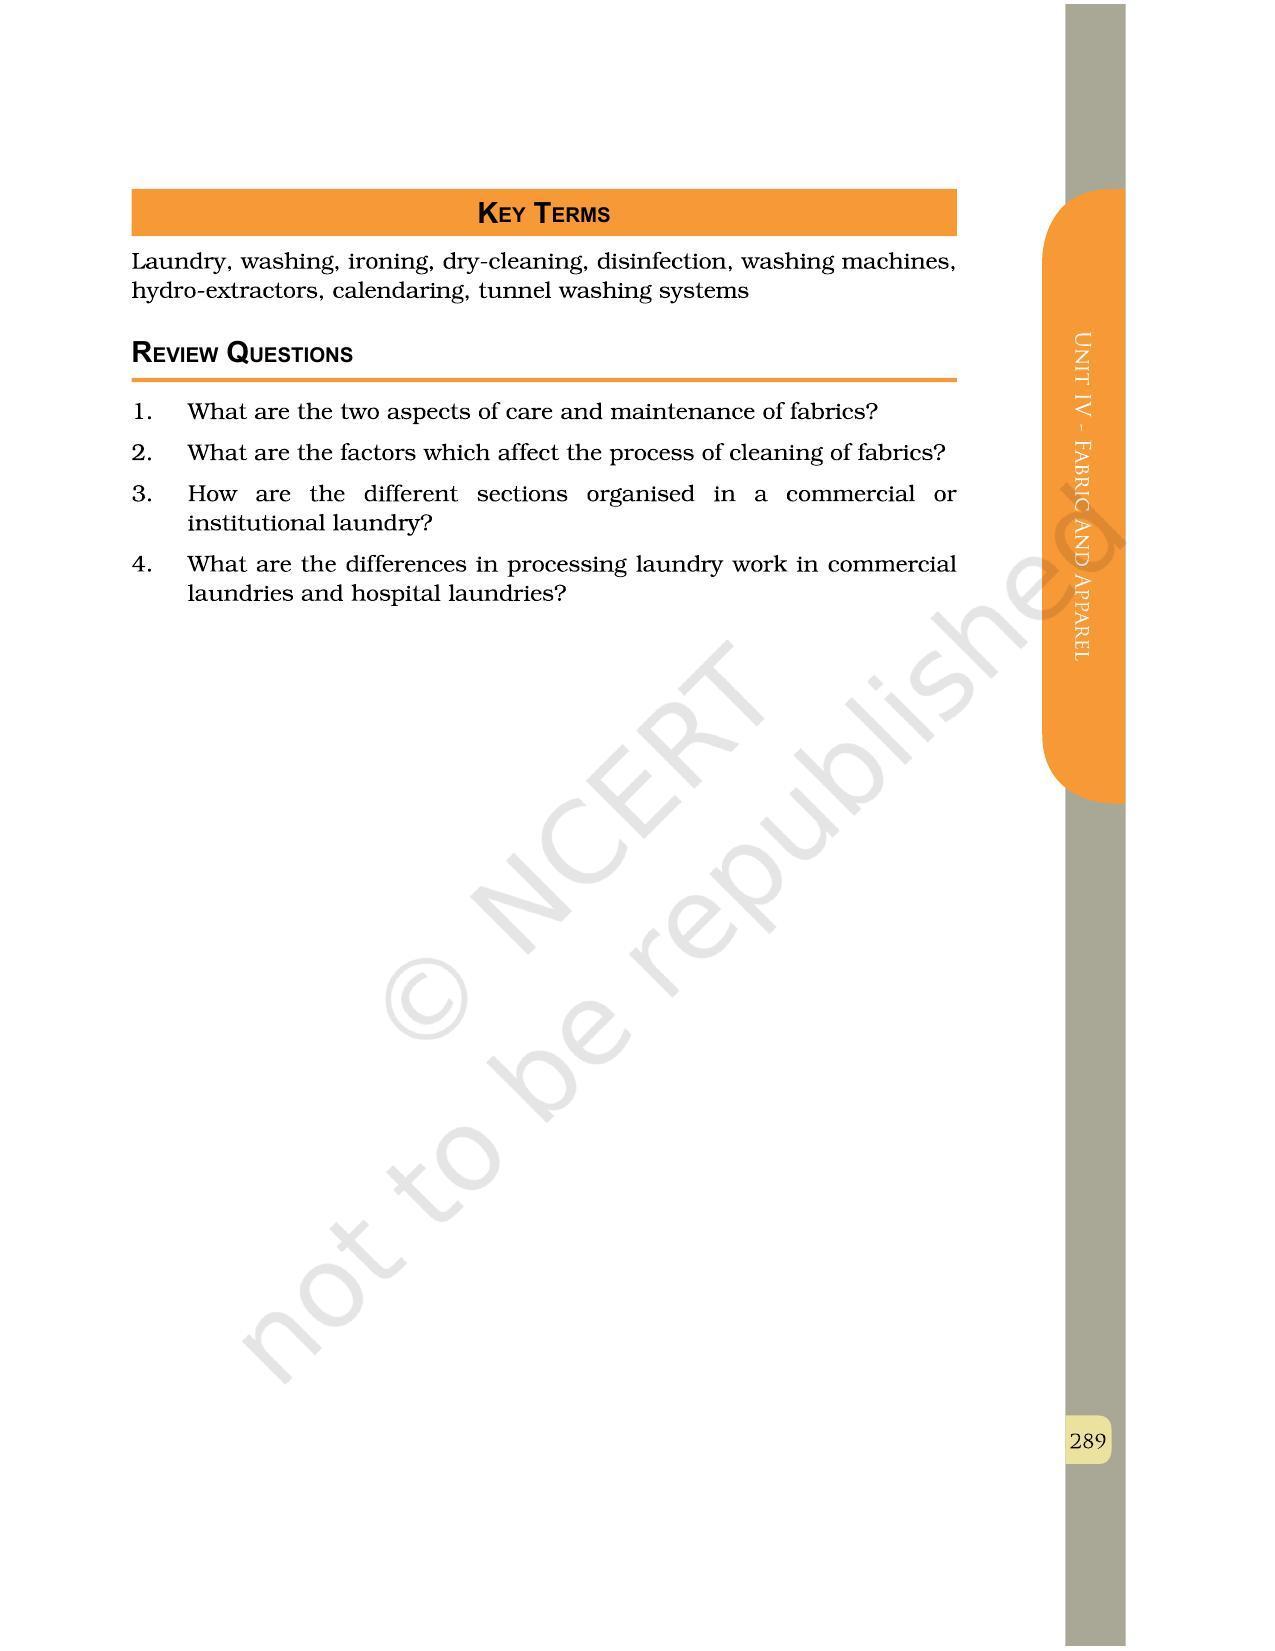 NCERT Book for Class 12 Home Science (Part -II) Chapter 15 Care and Maintenance of Fabrics in Institutions - Page 11